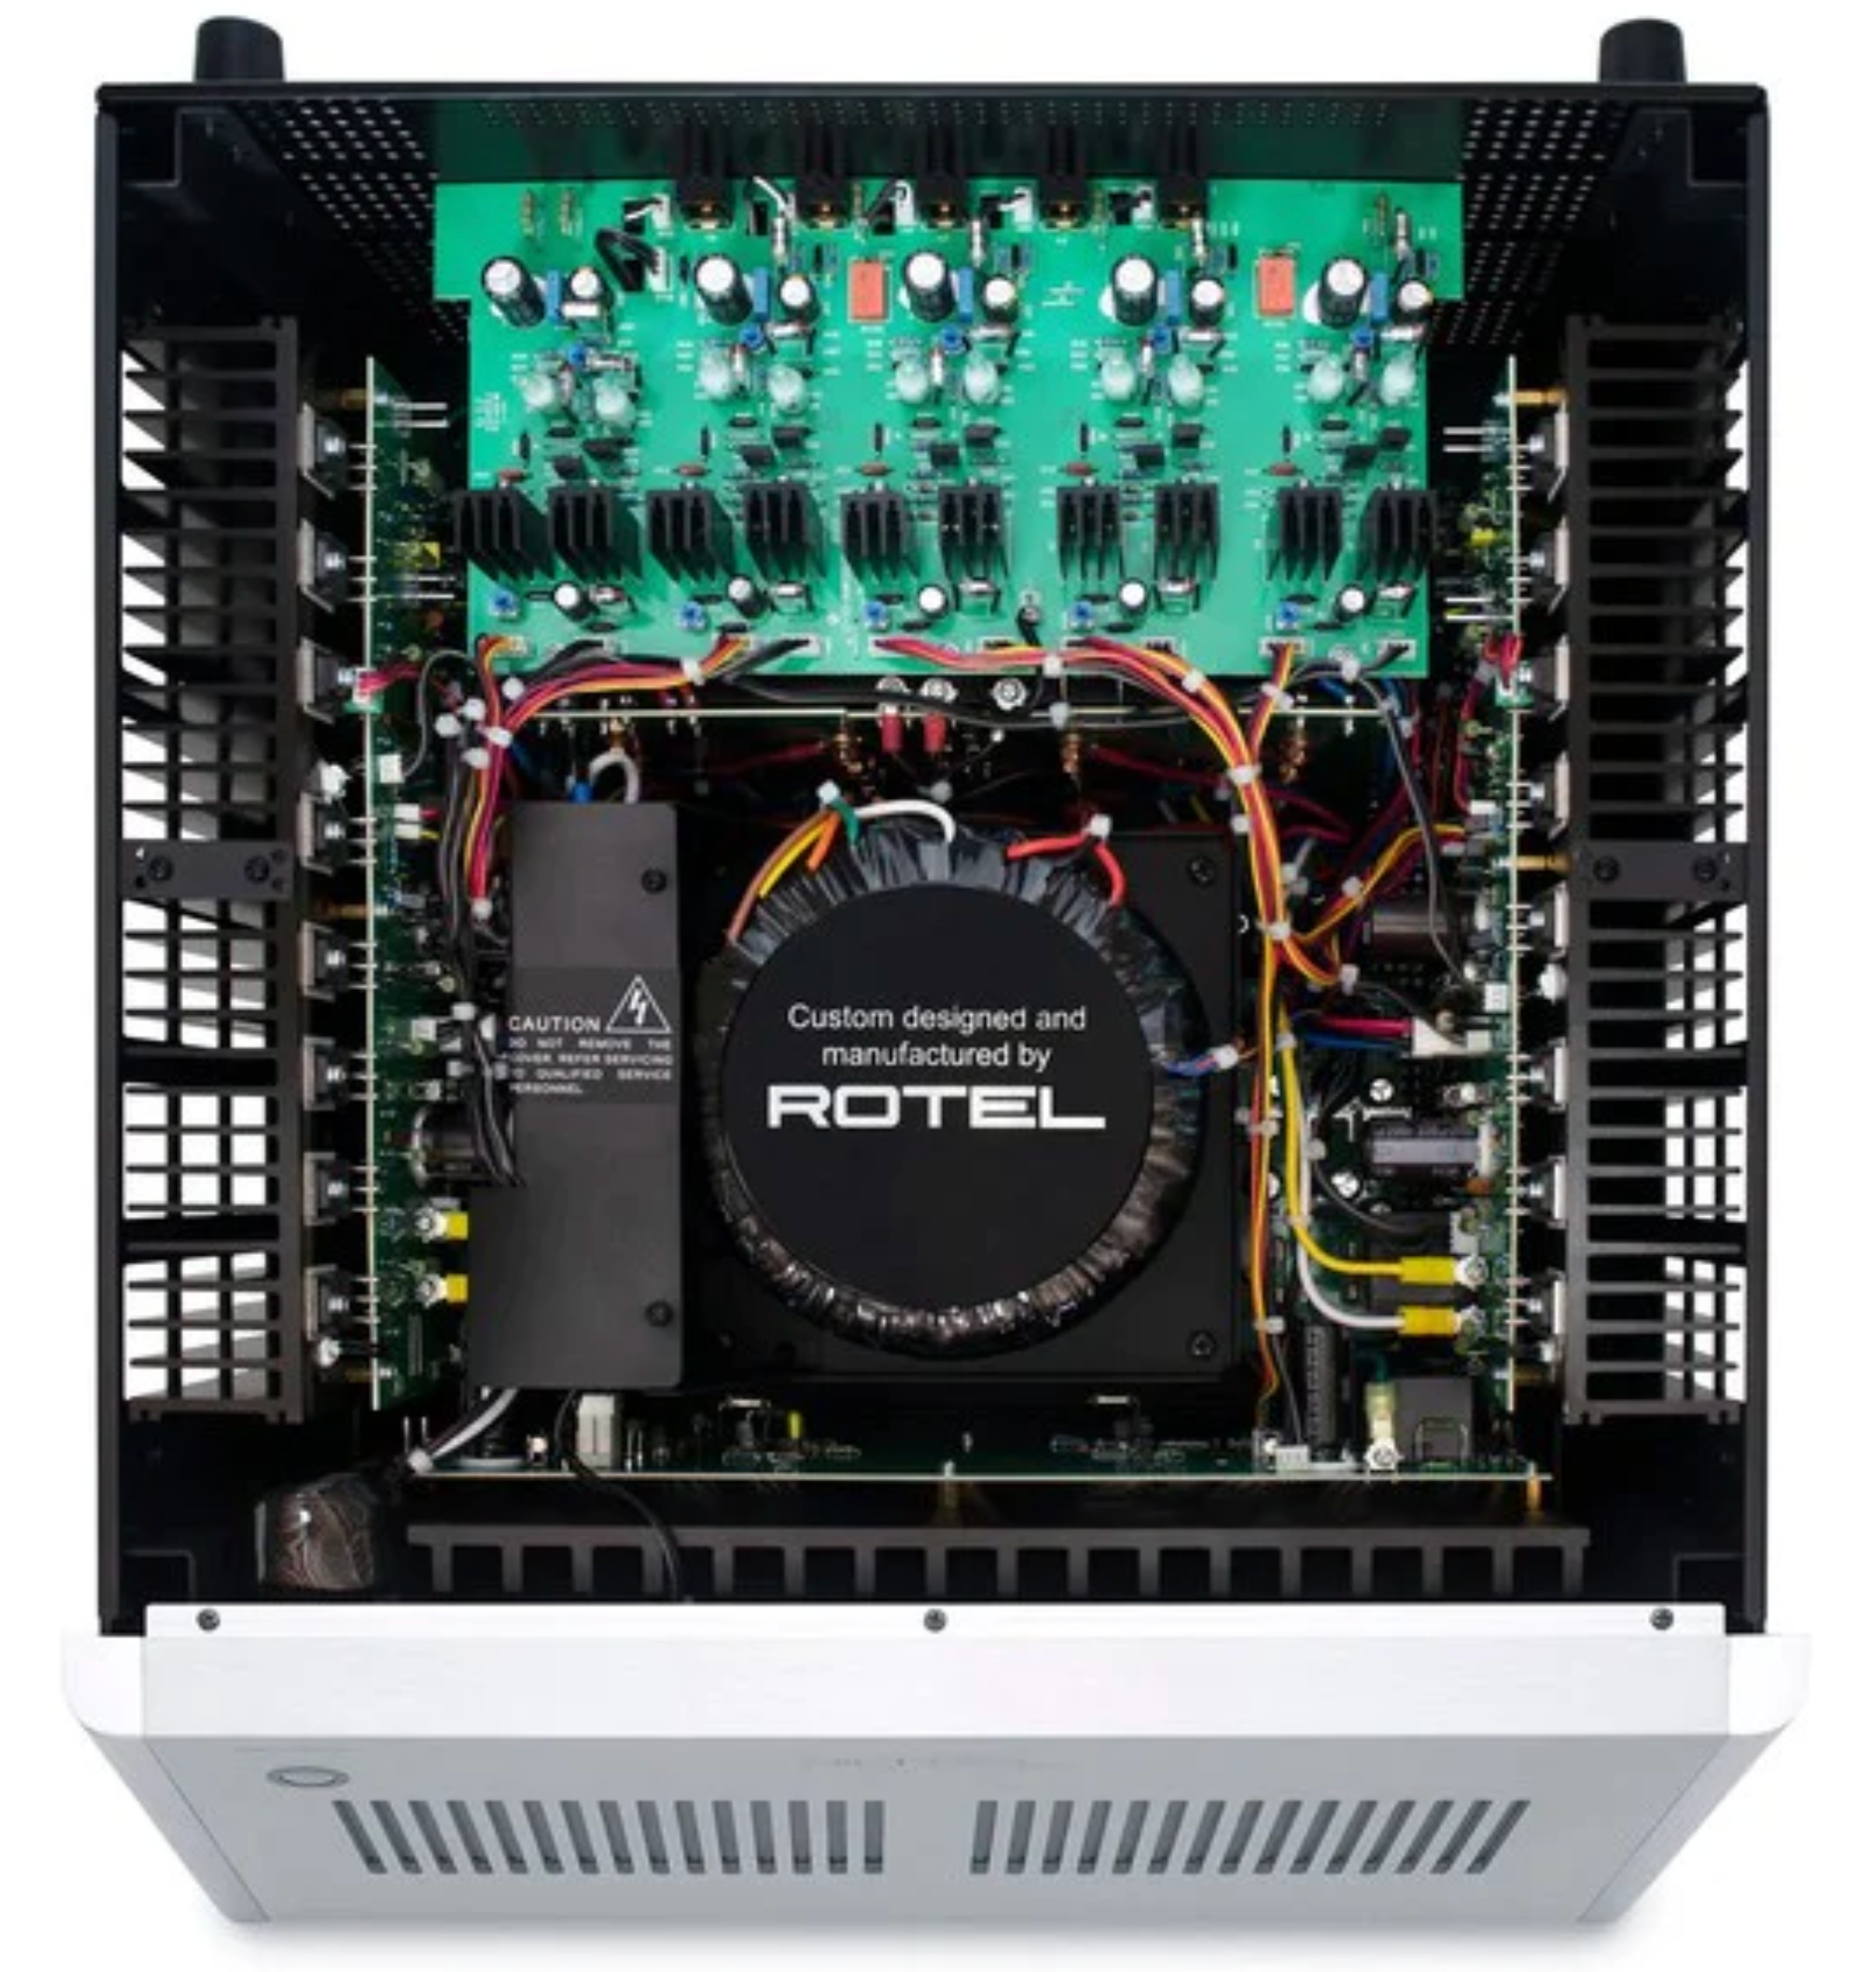 Rotel RMB-1585MKII Multi-Channel Power Amplifier. Silver internal image